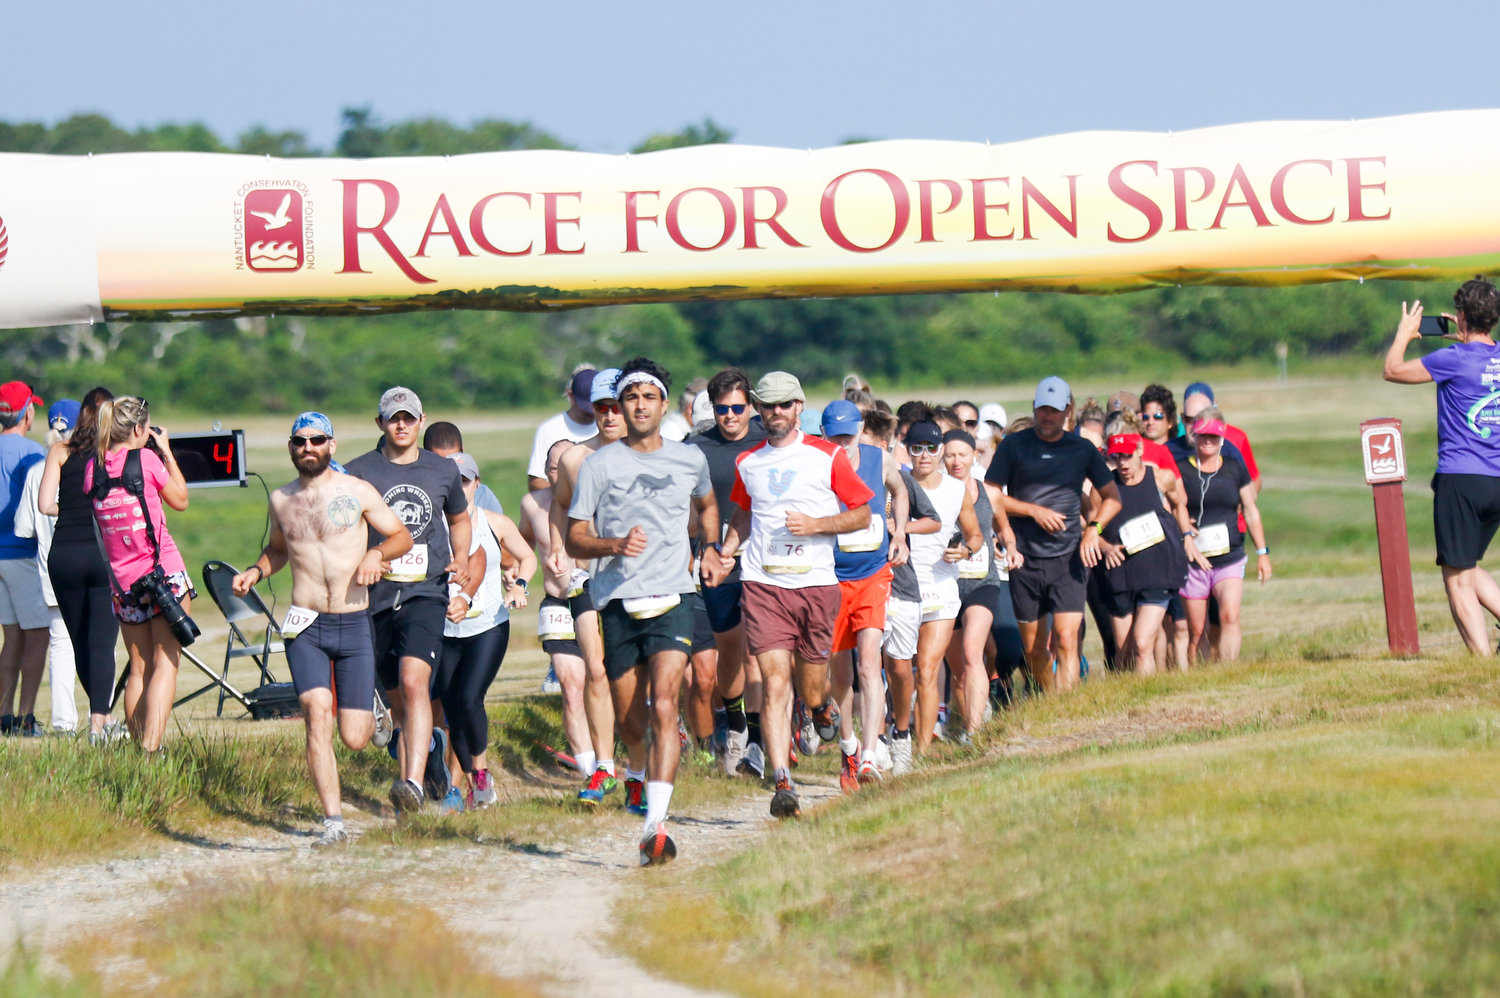 The start of the 2019 Nantucket Conservation Foundation Race for Open Space at the Milestone Cranberry Bog. Last year’s race was held virtually due to the coronavirus pandemic.